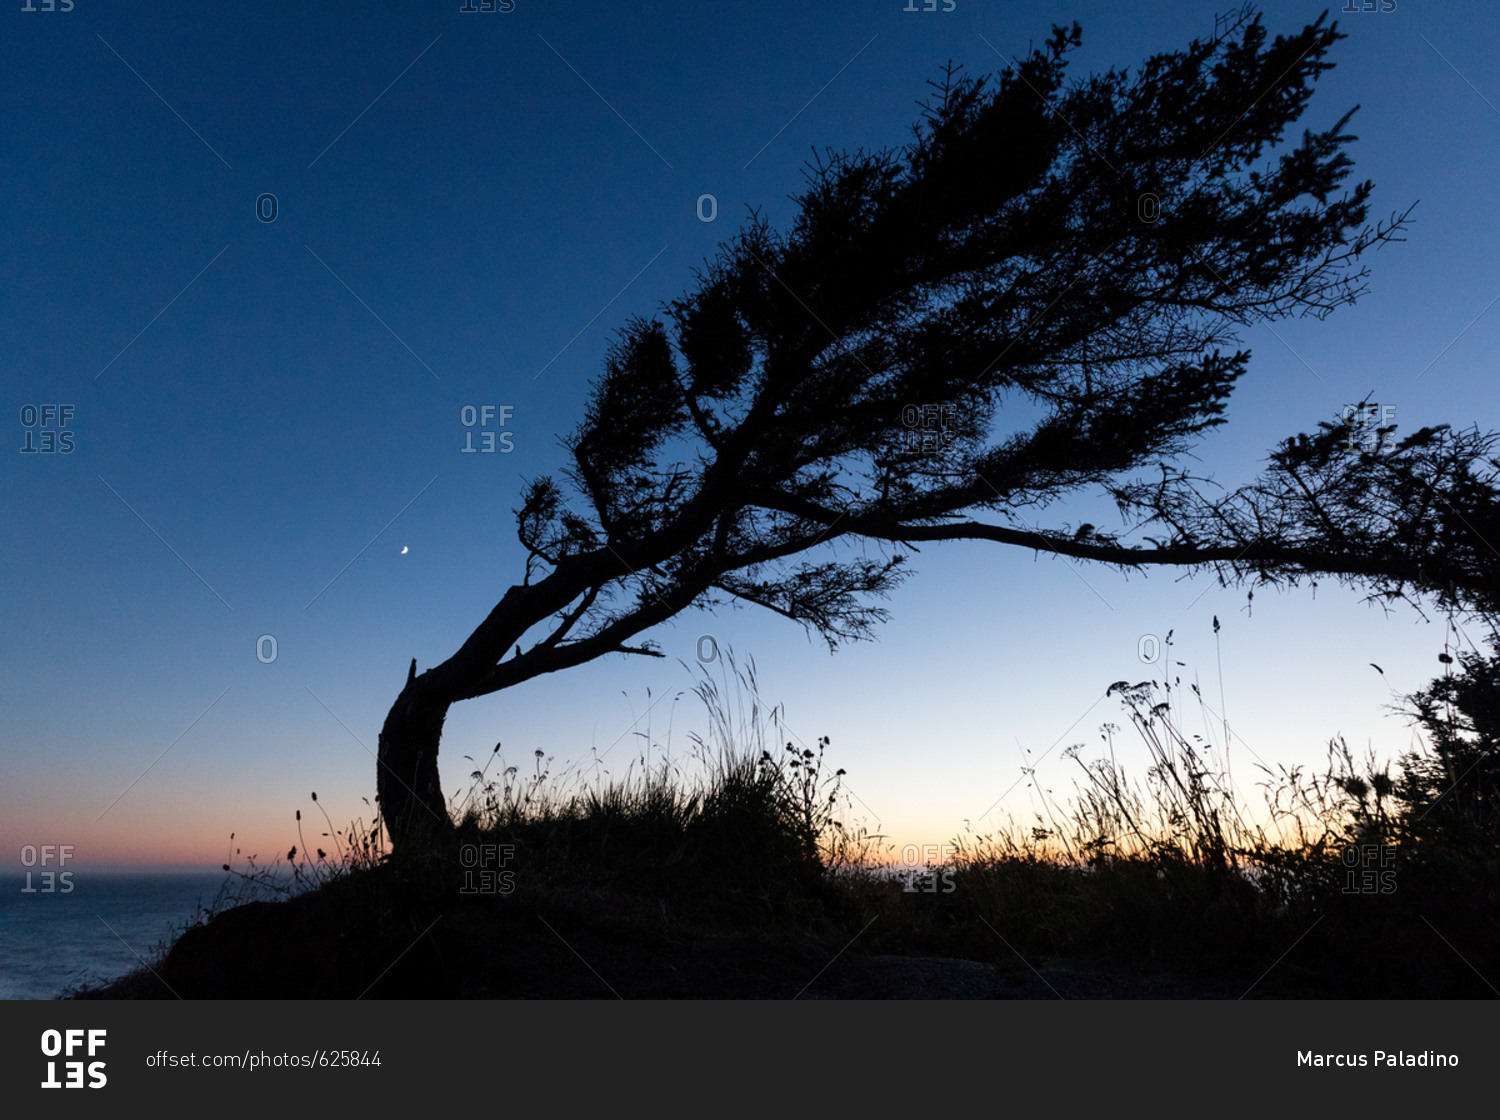 Silhouette of bent tree beside the ocean at night